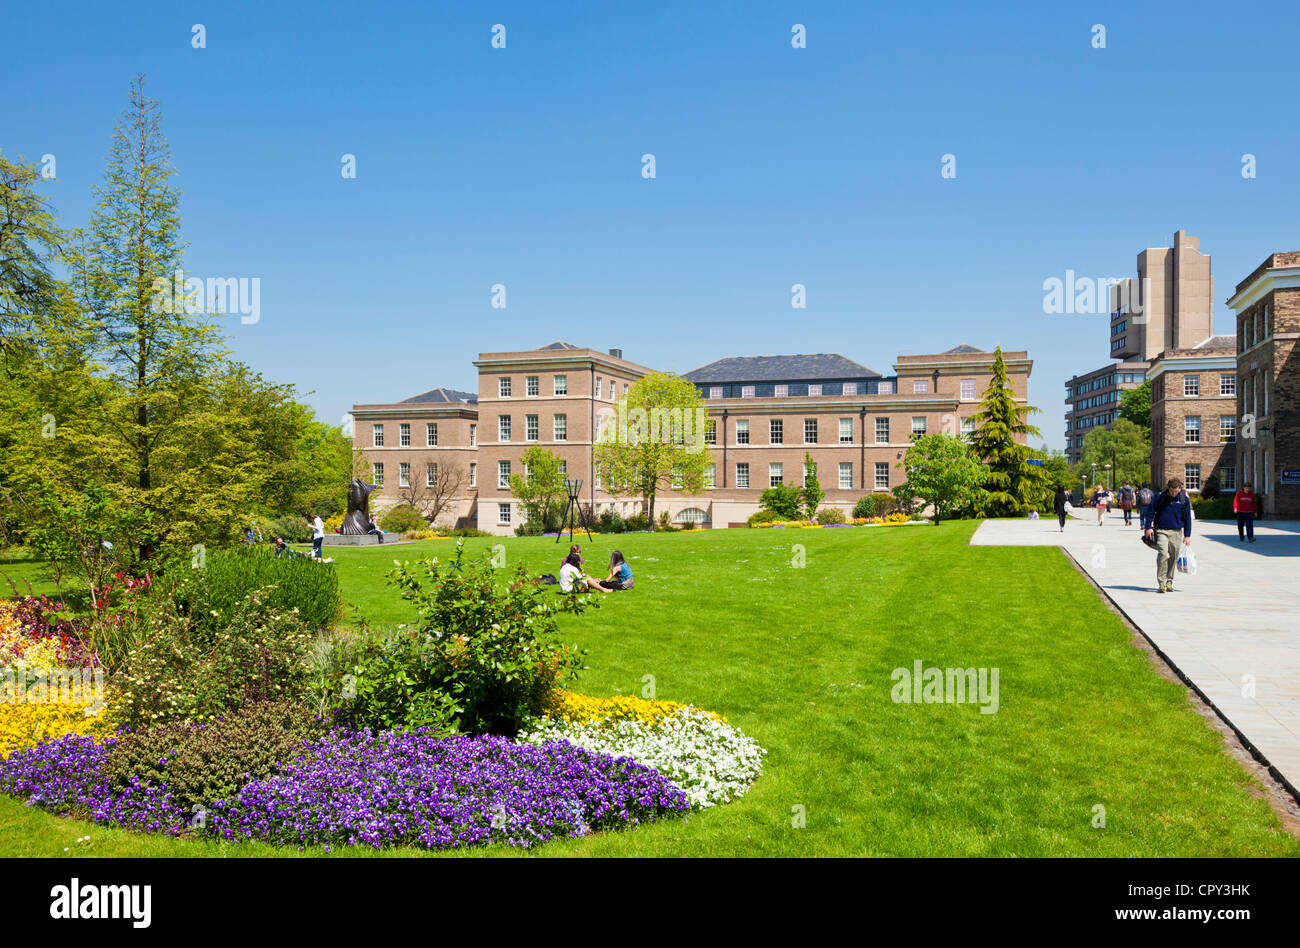 University of Leicester campus buildings students on grass Leicestershire East Midlands England UK GB EU Europe Stock Photo